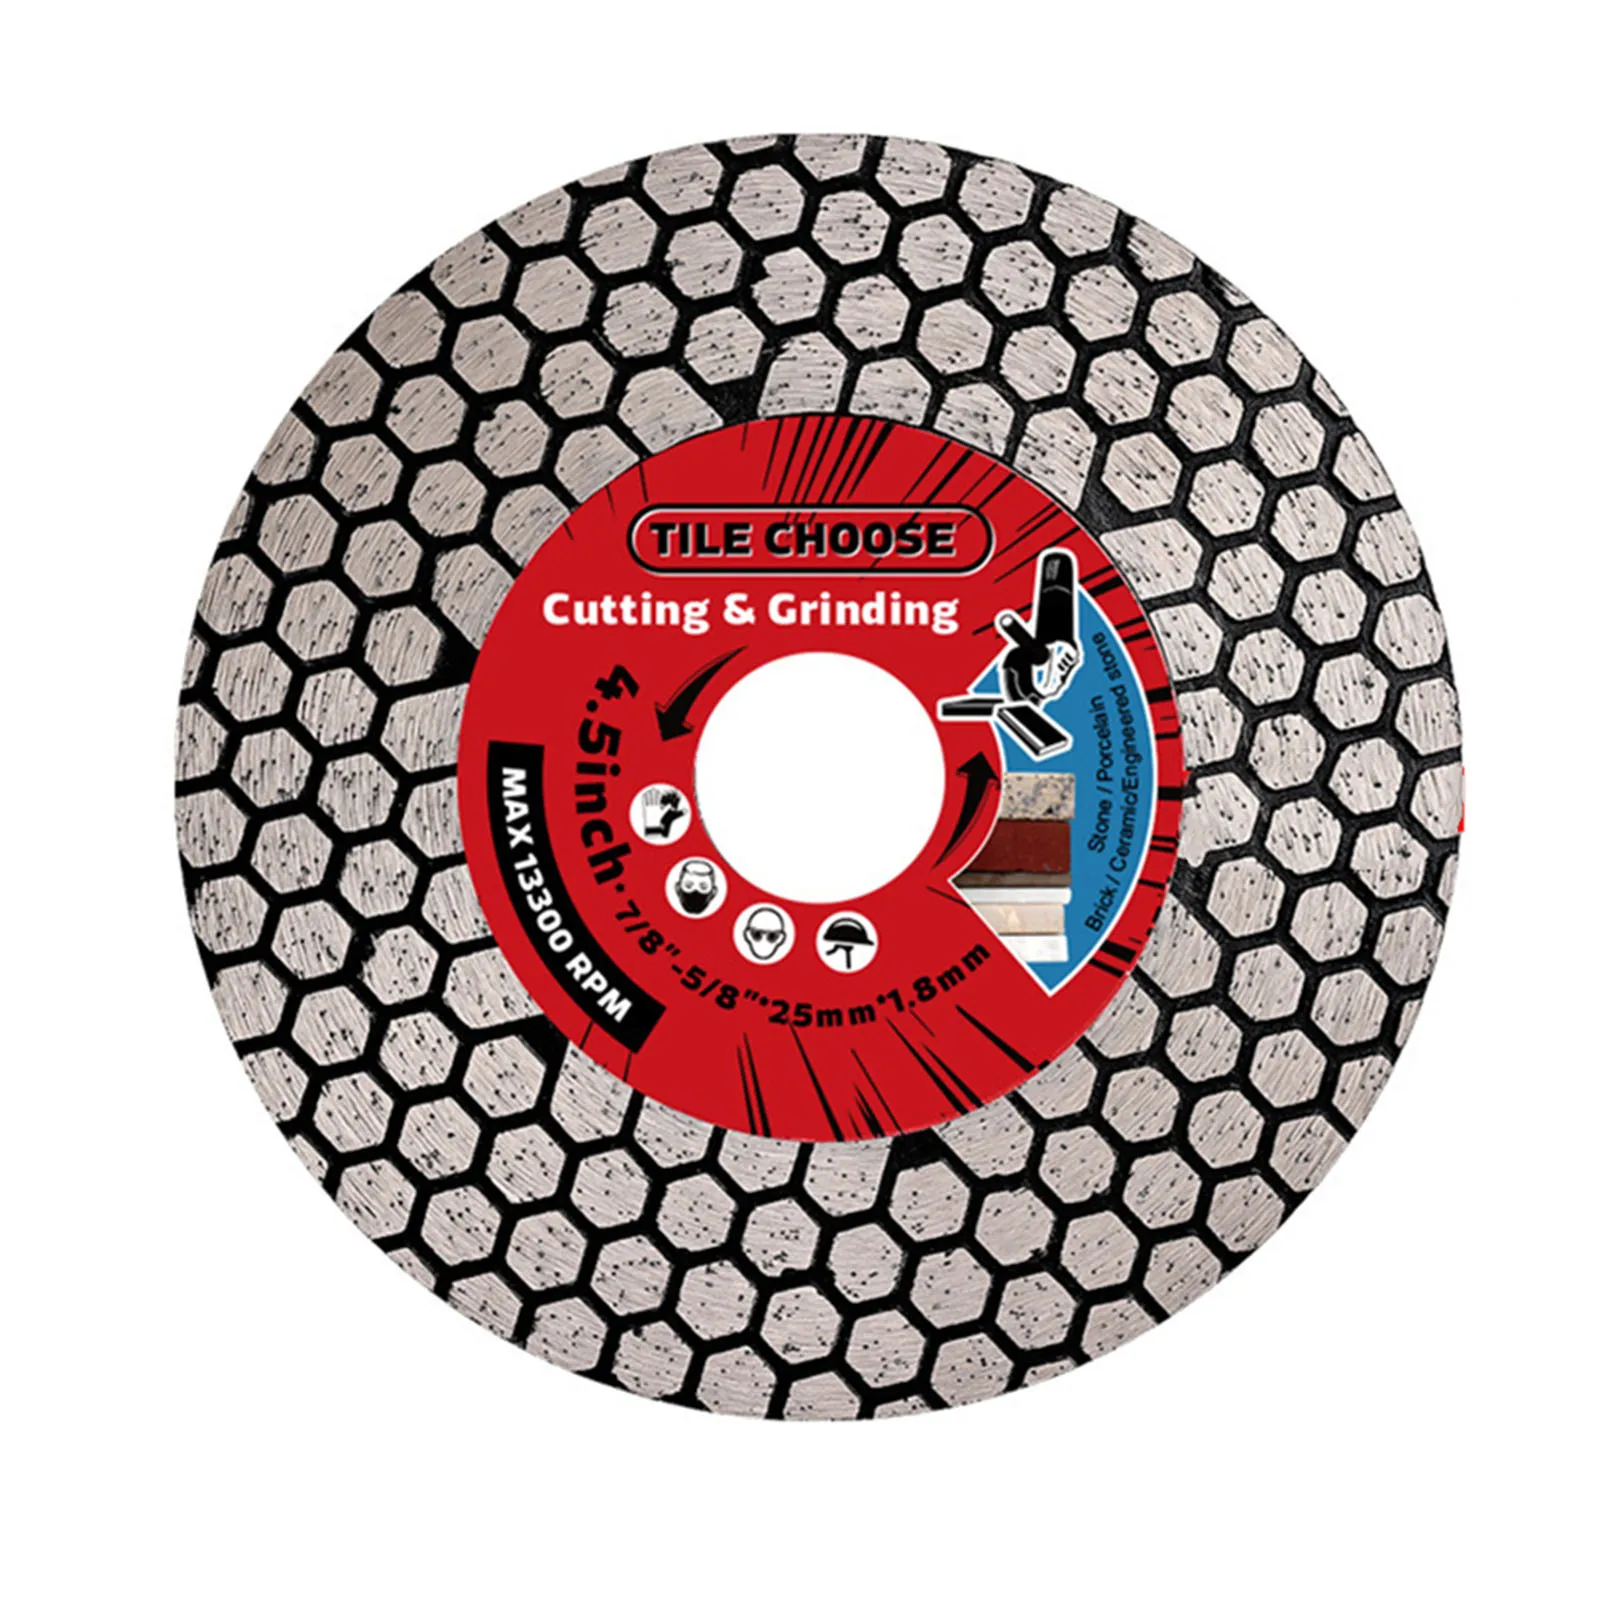 

115mm/125mm Diamond Saw Blade Cutting Disc Ceramic Tile Porcelain Marble Circular Saw Blade For Cutting Grinding Stone